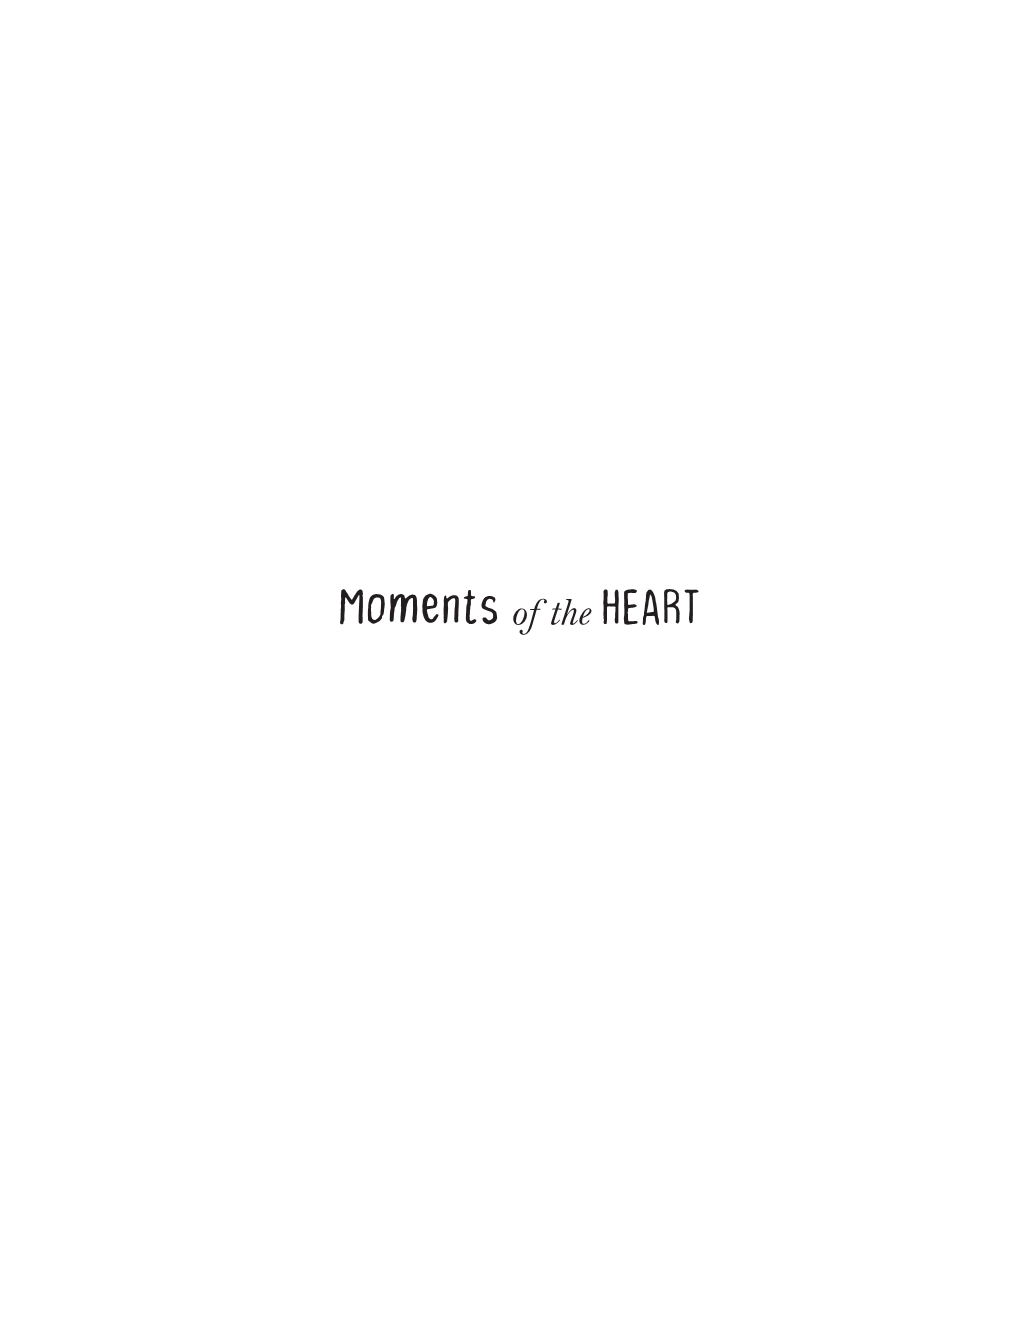 Moments of the HEART Endorsements for Moments of the HEART